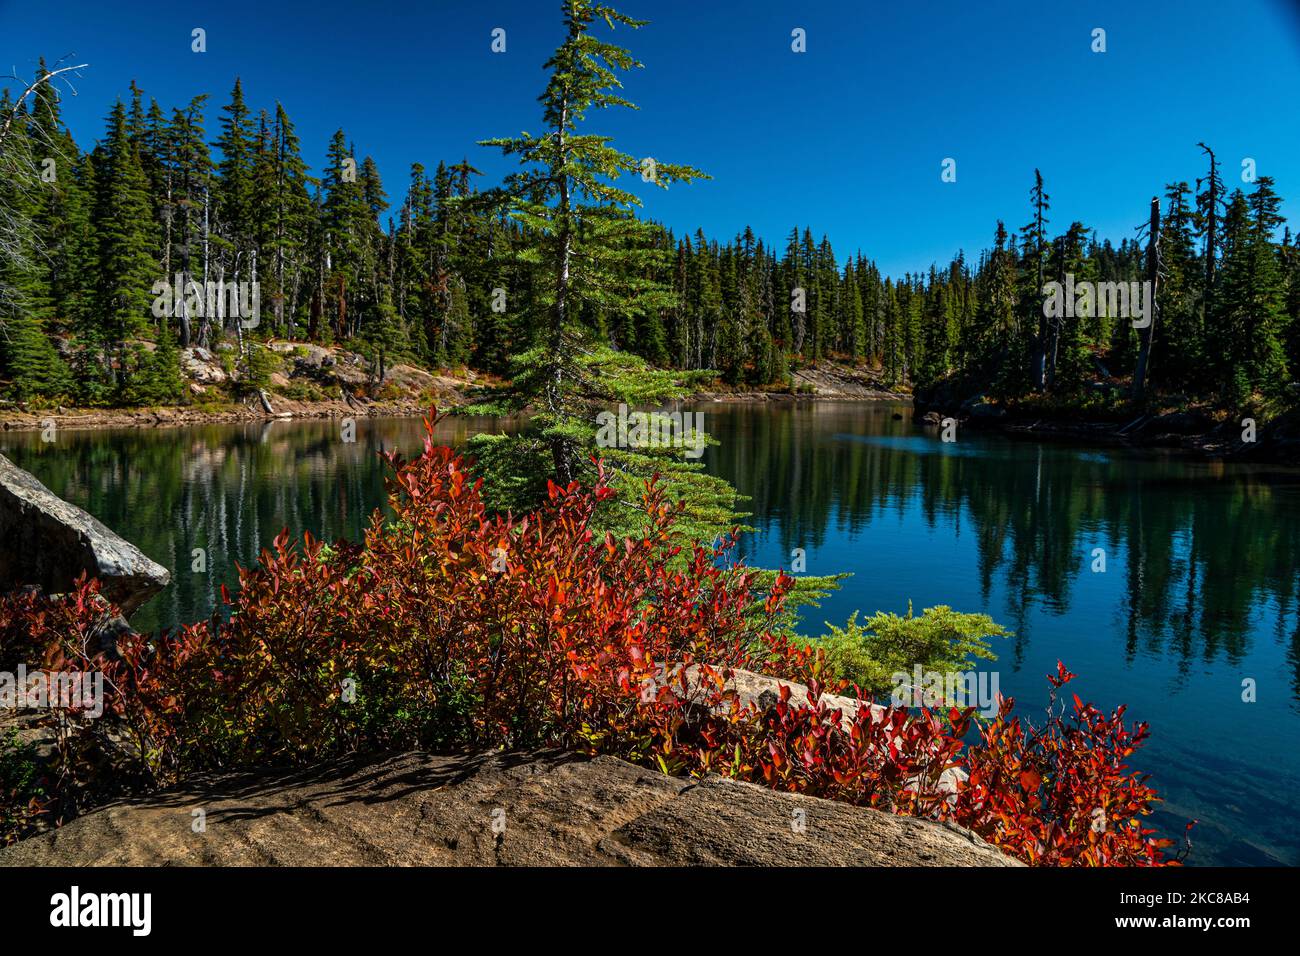 The larger of the Tenas Lakes on the Scott Mountain Trail in Central Oregon's Mt Washington Wilderness. Stock Photo